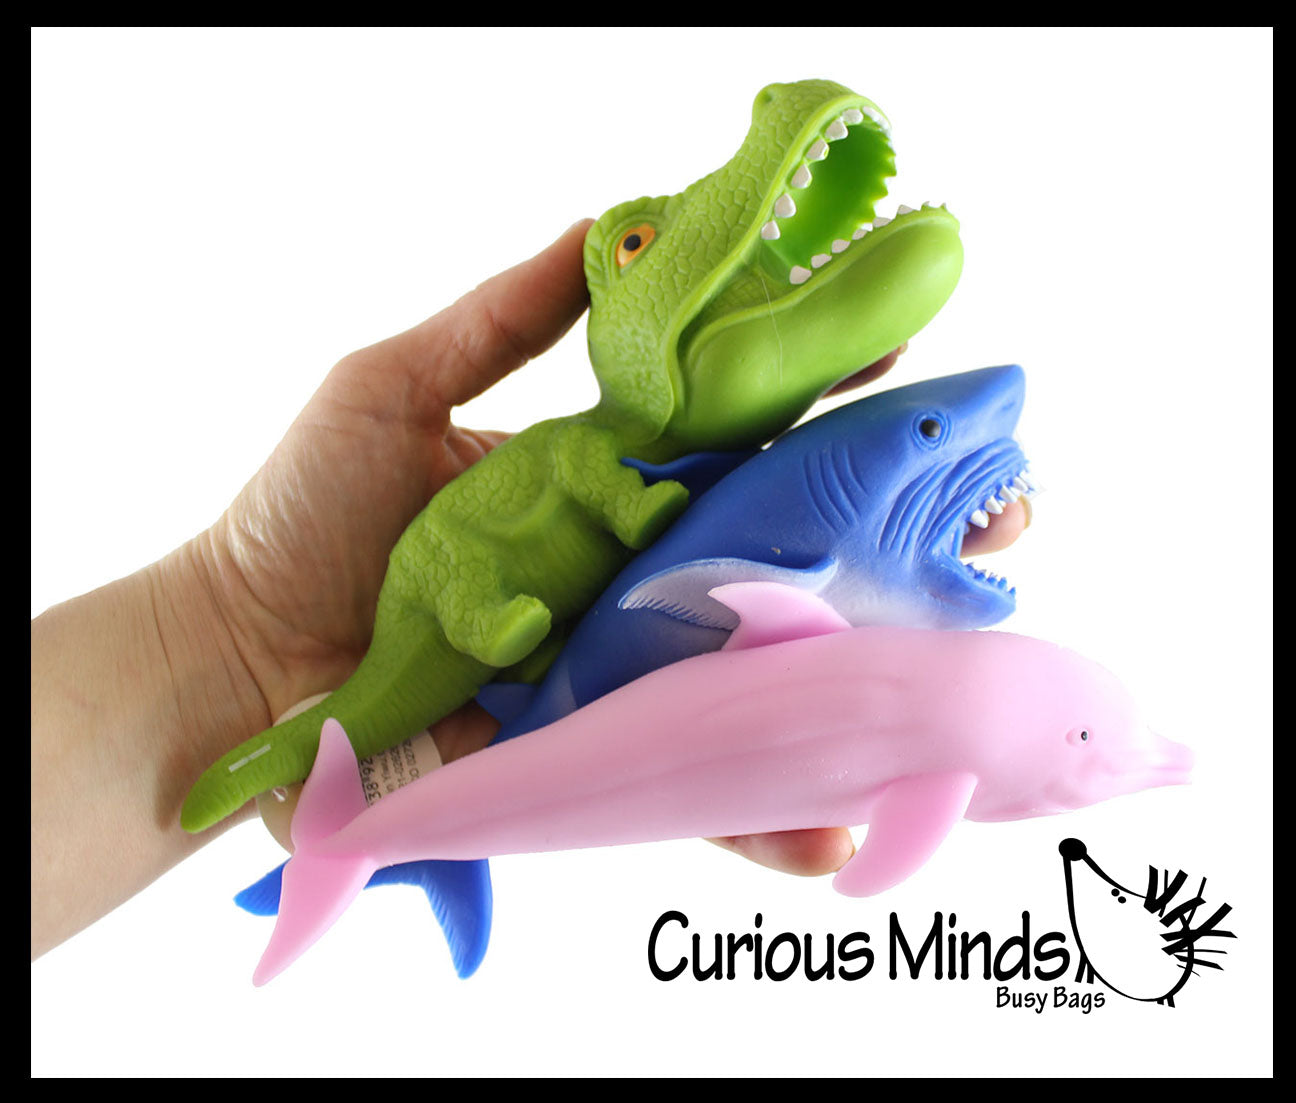 Set of 3 Sand Filled Squishy Animals - Dinosaur, Dolphin, and Shark - Moldable Sensory, Stress, Squeeze Fidget Toy ADHD Special Needs Soothing Ocean Animal Dino